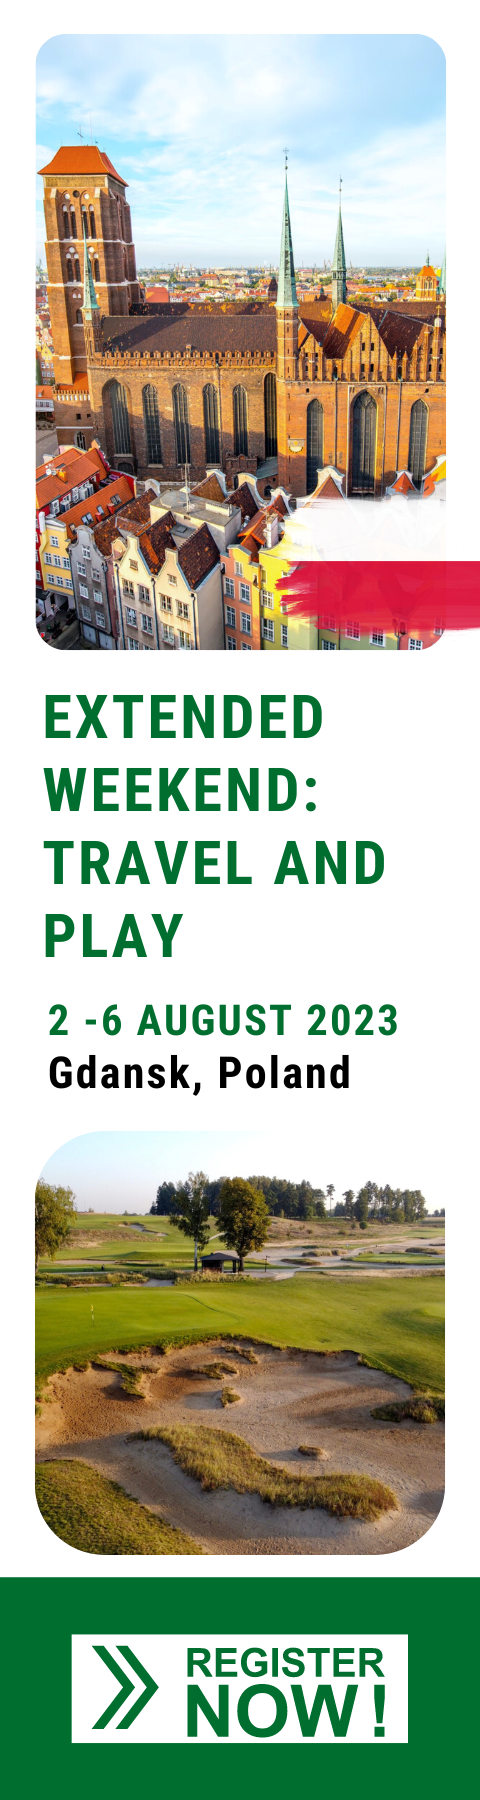 Extended weekend travel and play